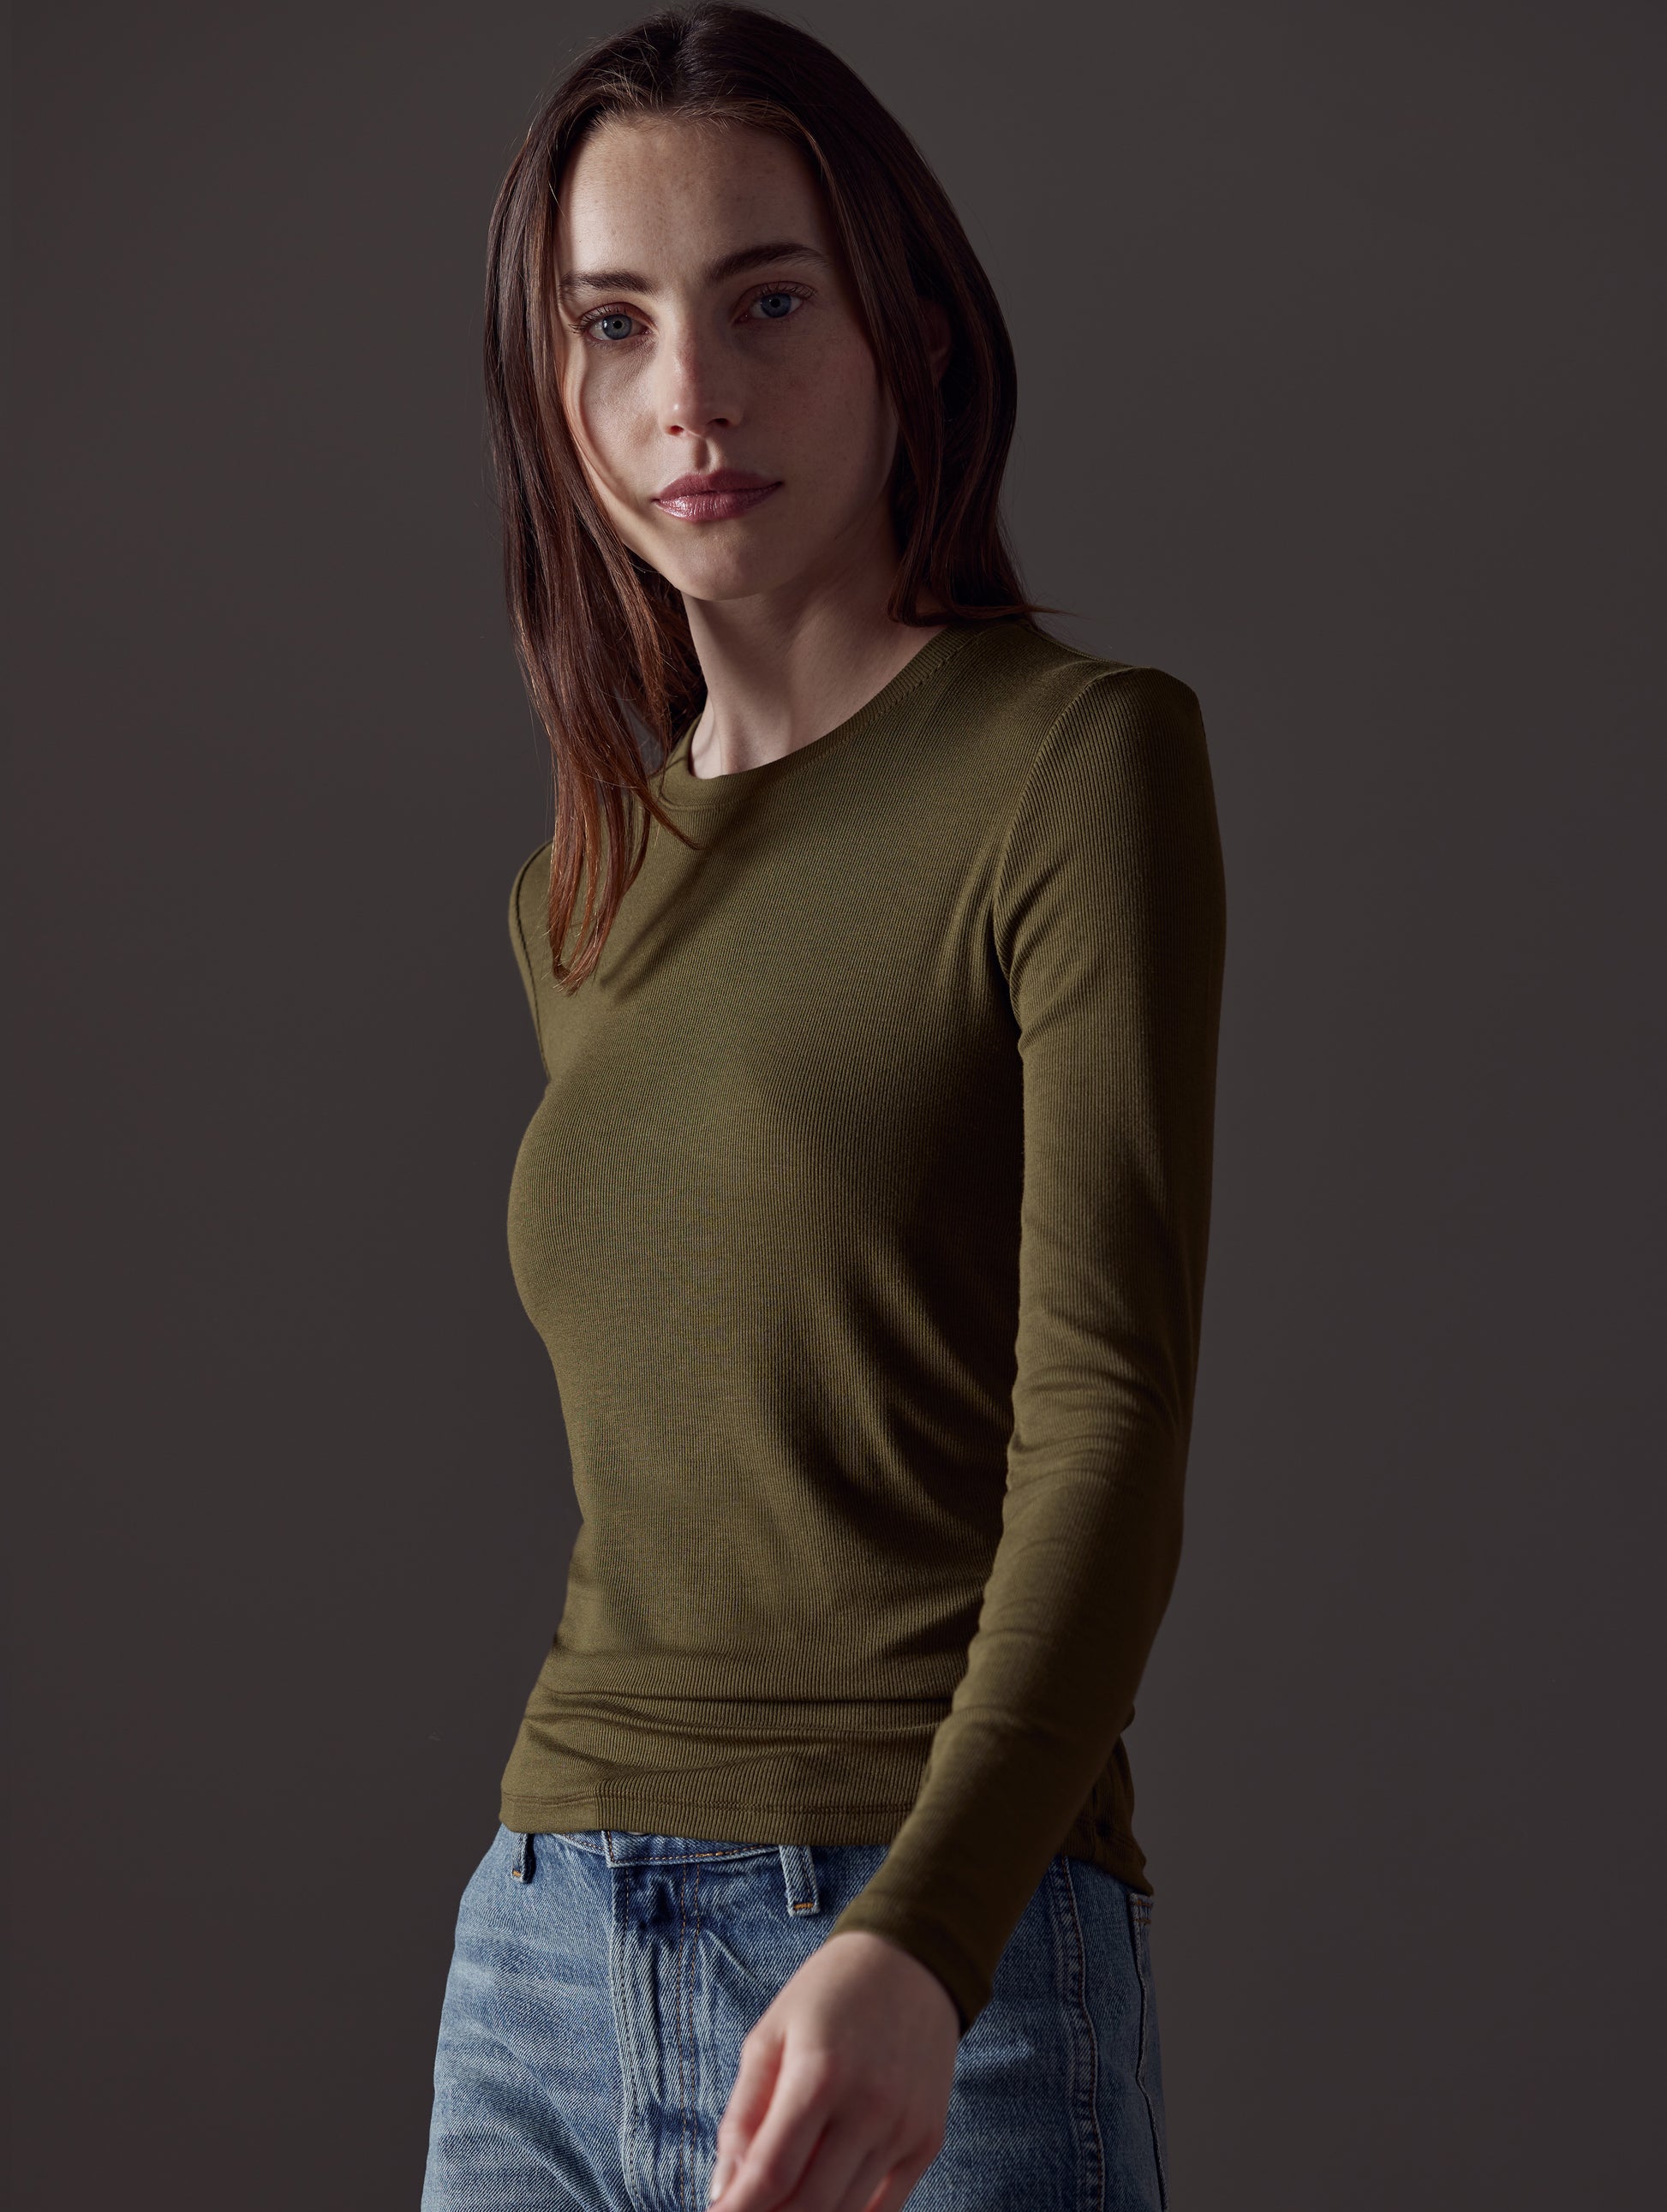 woman wearing green long-sleeve shirt from AETHER Apparel